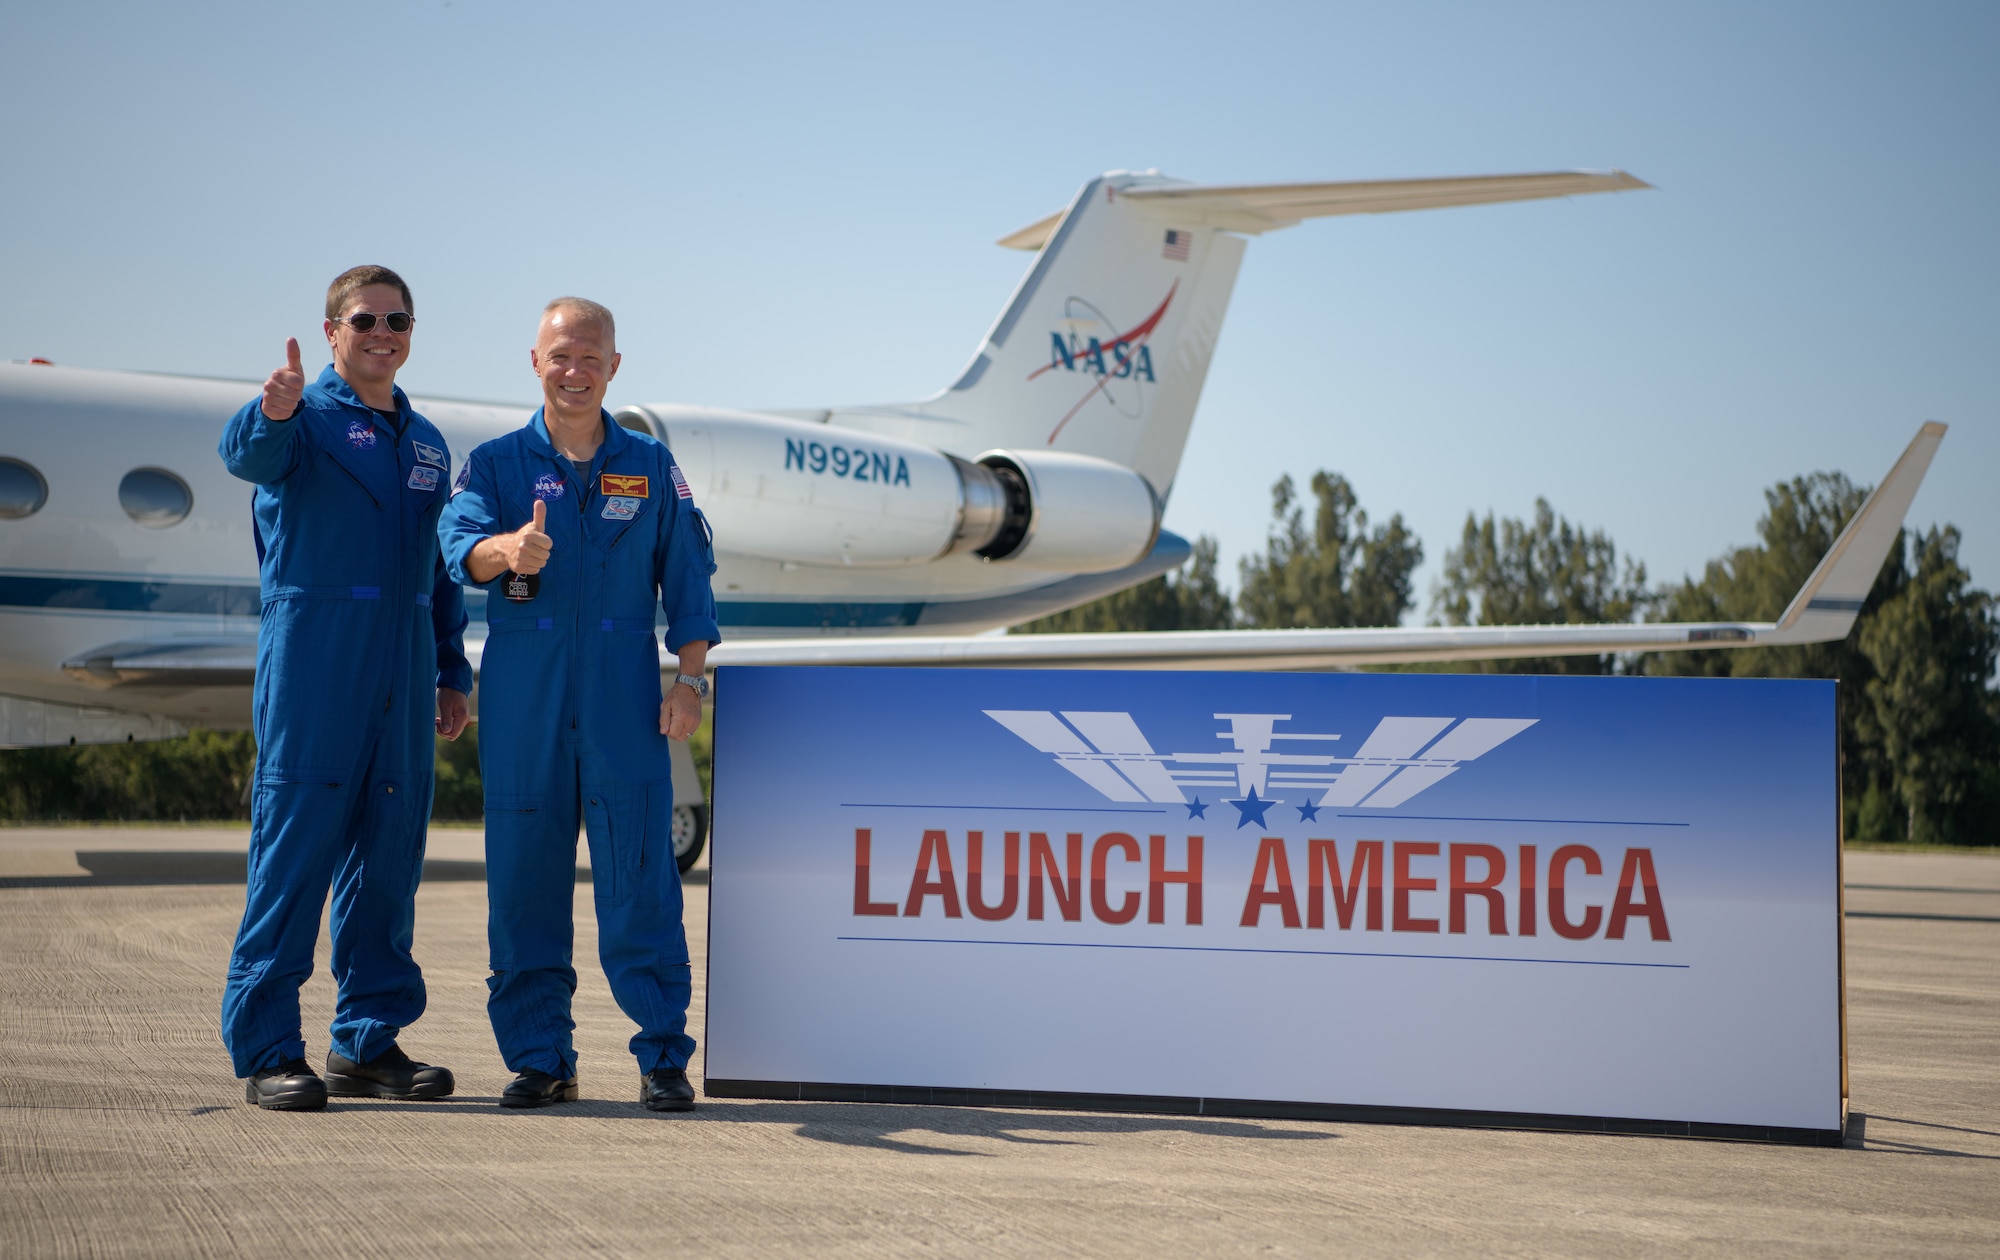 NASA astronauts Robert Behnken, left, and Douglas Hurley gives a thumbs up after arriving at the Launch and Landing Facility at NASA’s Kennedy Space Center ahead of SpaceX’s Demo-2 mission, Wednesday, May 20, 2020, in Florida. NASA’s SpaceX Demo-2 mission is the first launch with astronauts of the SpaceX Crew Dragon spacecraft and Falcon 9 rocket to the International Space Station as part of the agency’s Commercial Crew Program. The flight test will serve as an end-to-end demonstration of SpaceX’s crew transportation system. Behnken and Hurley are scheduled to launch at 4:33 p.m. EDT on Wednesday, May 27, from Launch Complex 39A at the Kennedy Space Center. A new era of human spaceflight is set to begin as American astronauts once again launch on an American rocket from American soil to low-Earth orbit for the first time since the conclusion of the Space Shuttle Program in 2011.  Photo Credit: (NASA/Bill Ingalls)